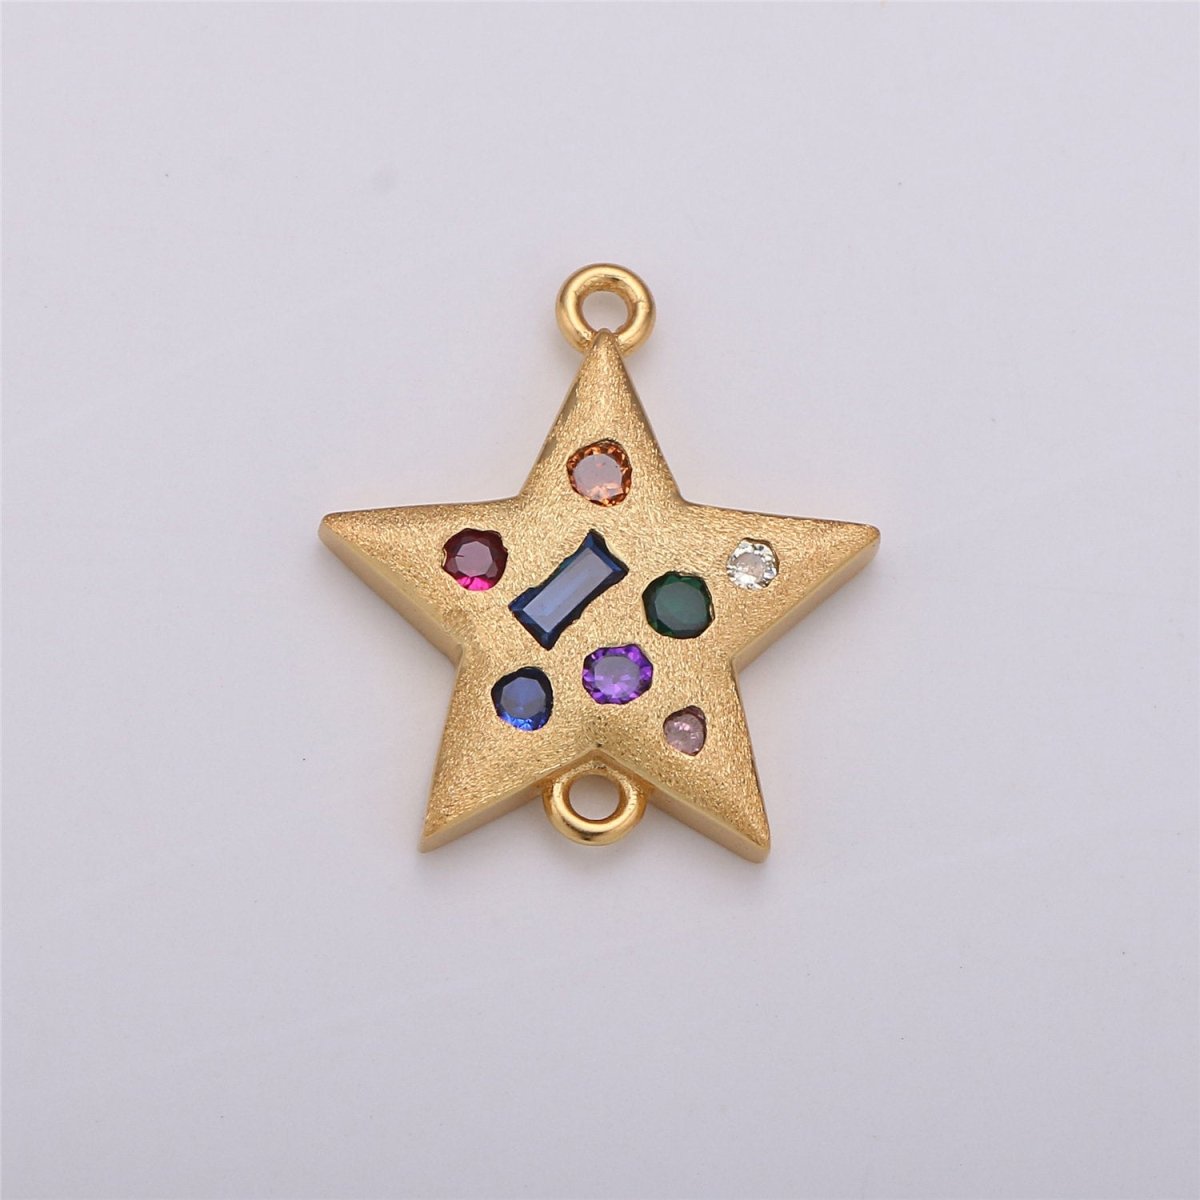 Dainty 18K Star Connector Charm, Gold Filled Star Bracelet Connector, Multi-Color CZ Stone, 20mmx14mm For Layer Necklace Earring Bracelet F-209 - DLUXCA